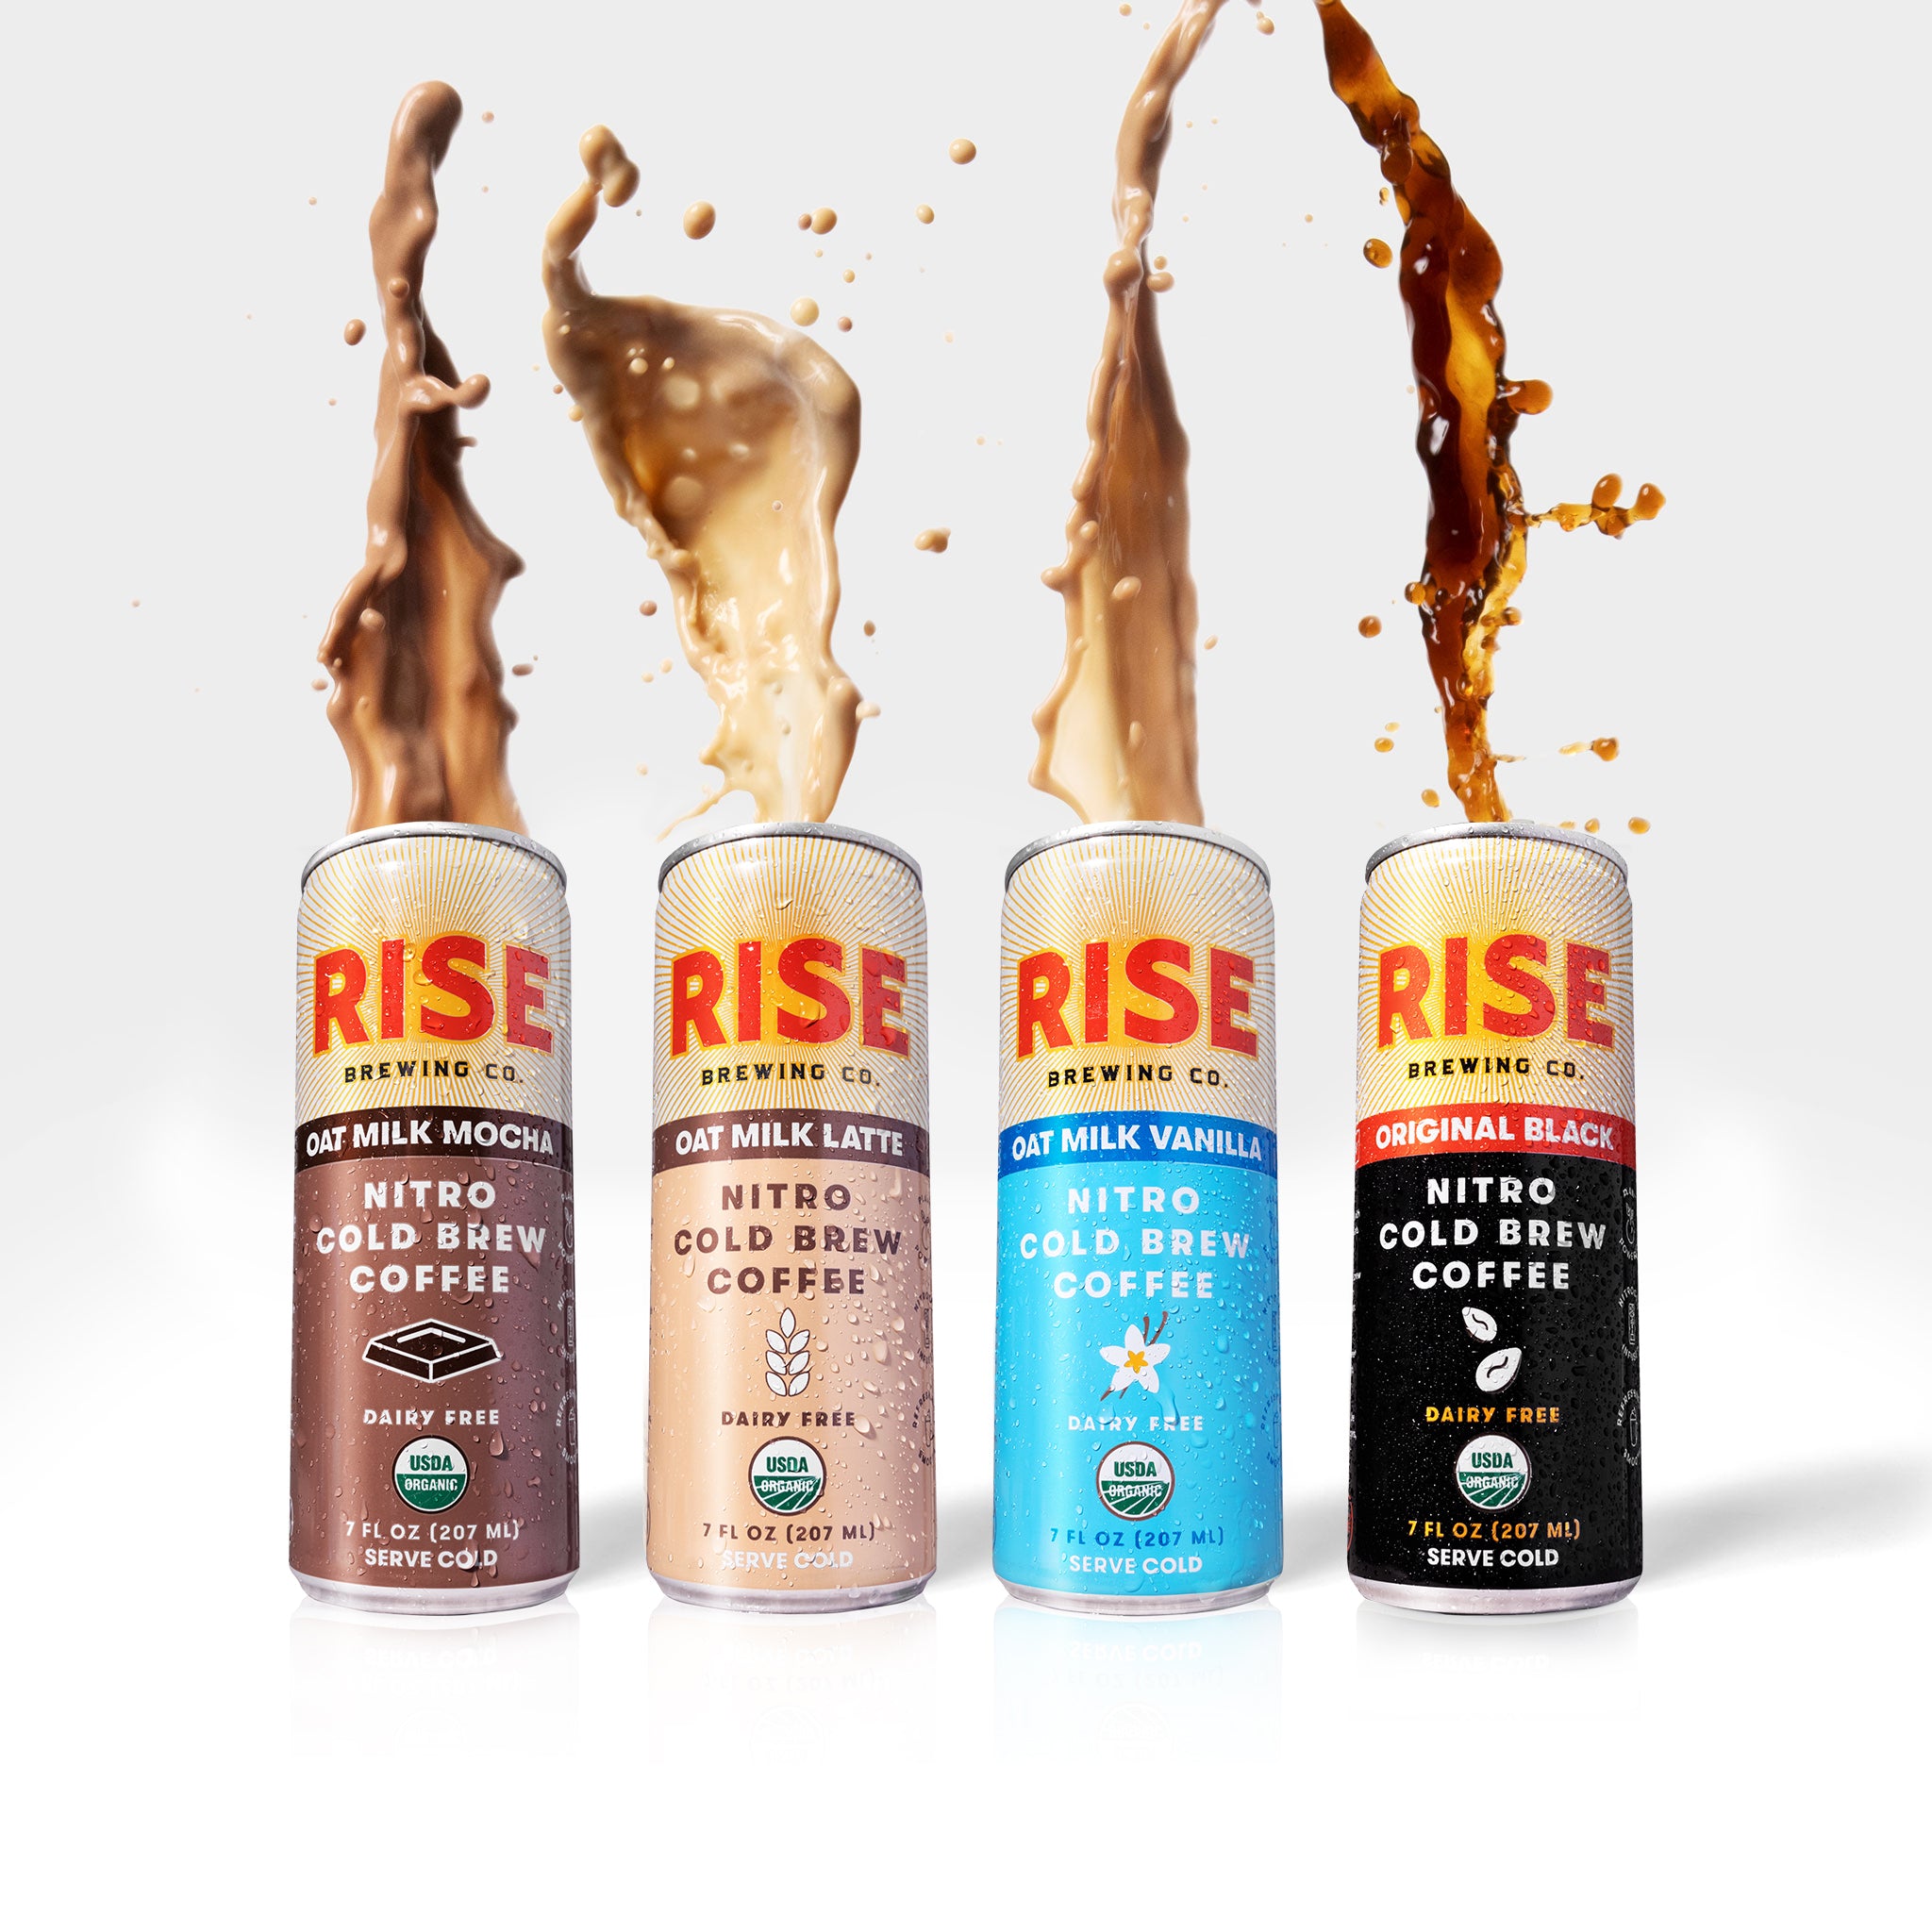 RISE Nitro Cold Brew Cans explode